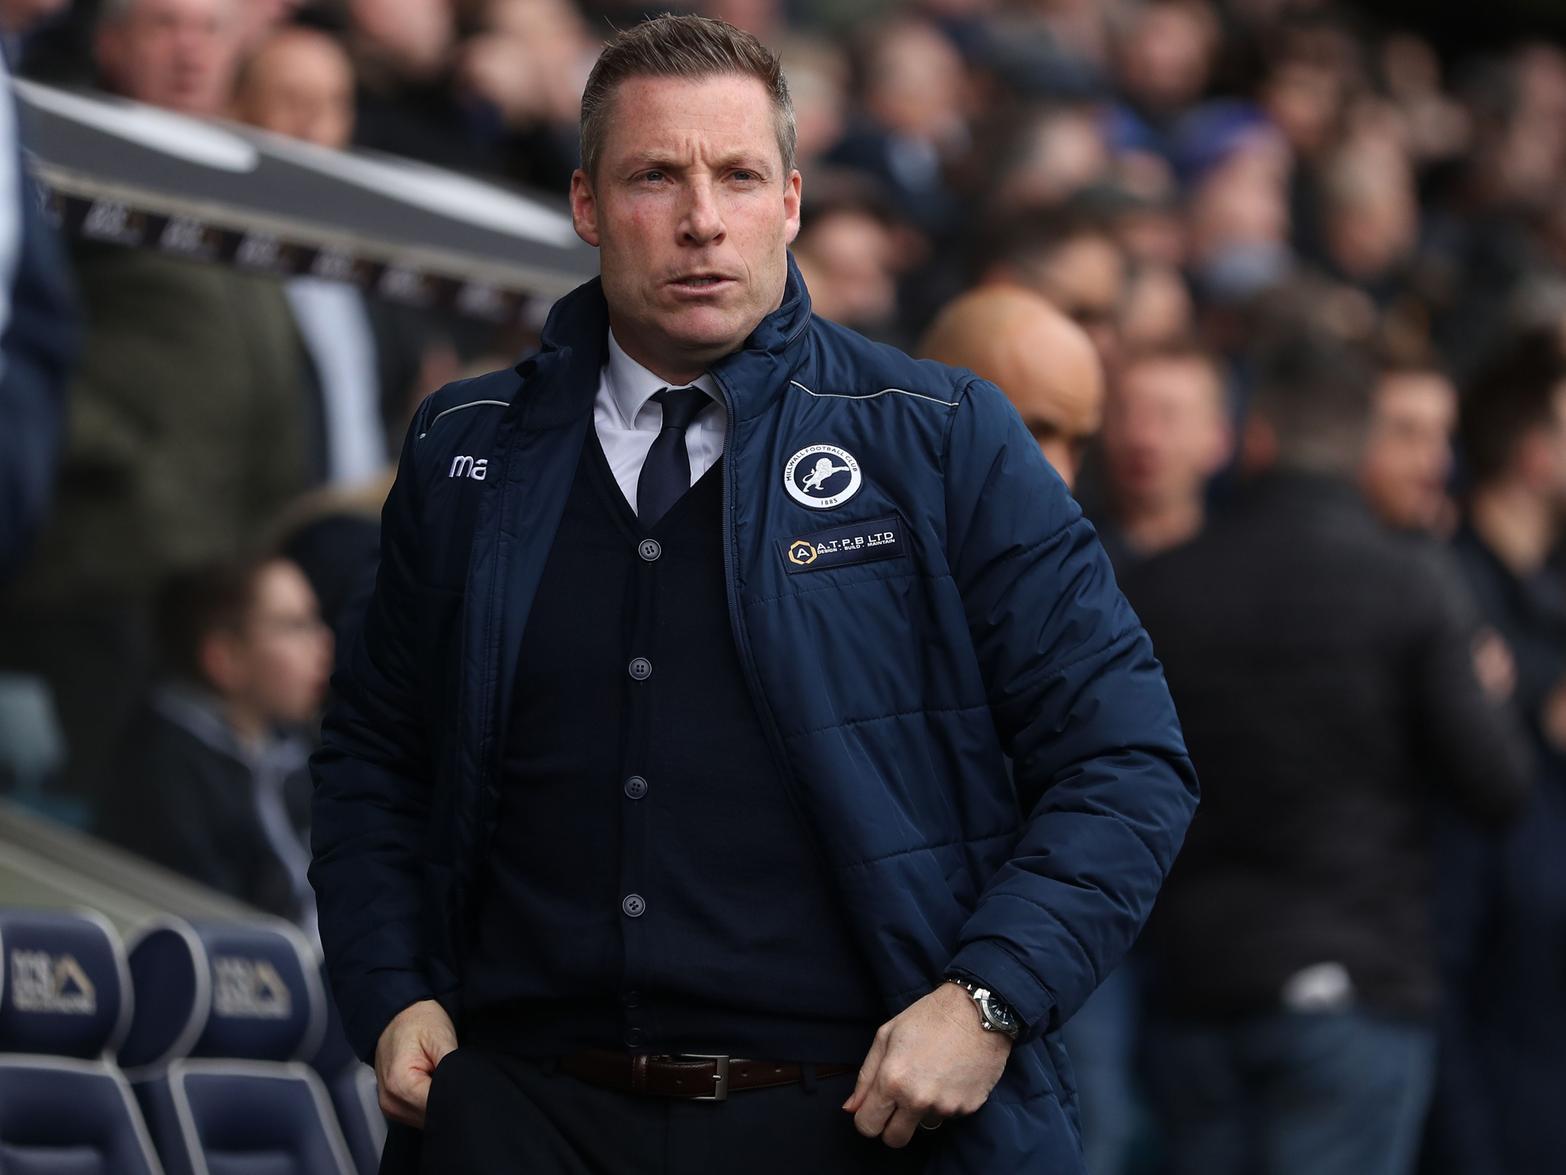 Ex-Millwall manager Neil Harris is the bookies' firm favourite to take the Cardiff City job, after Neil Warnock left the club by mutual consent on Monday afternoon. (Sky Bet)